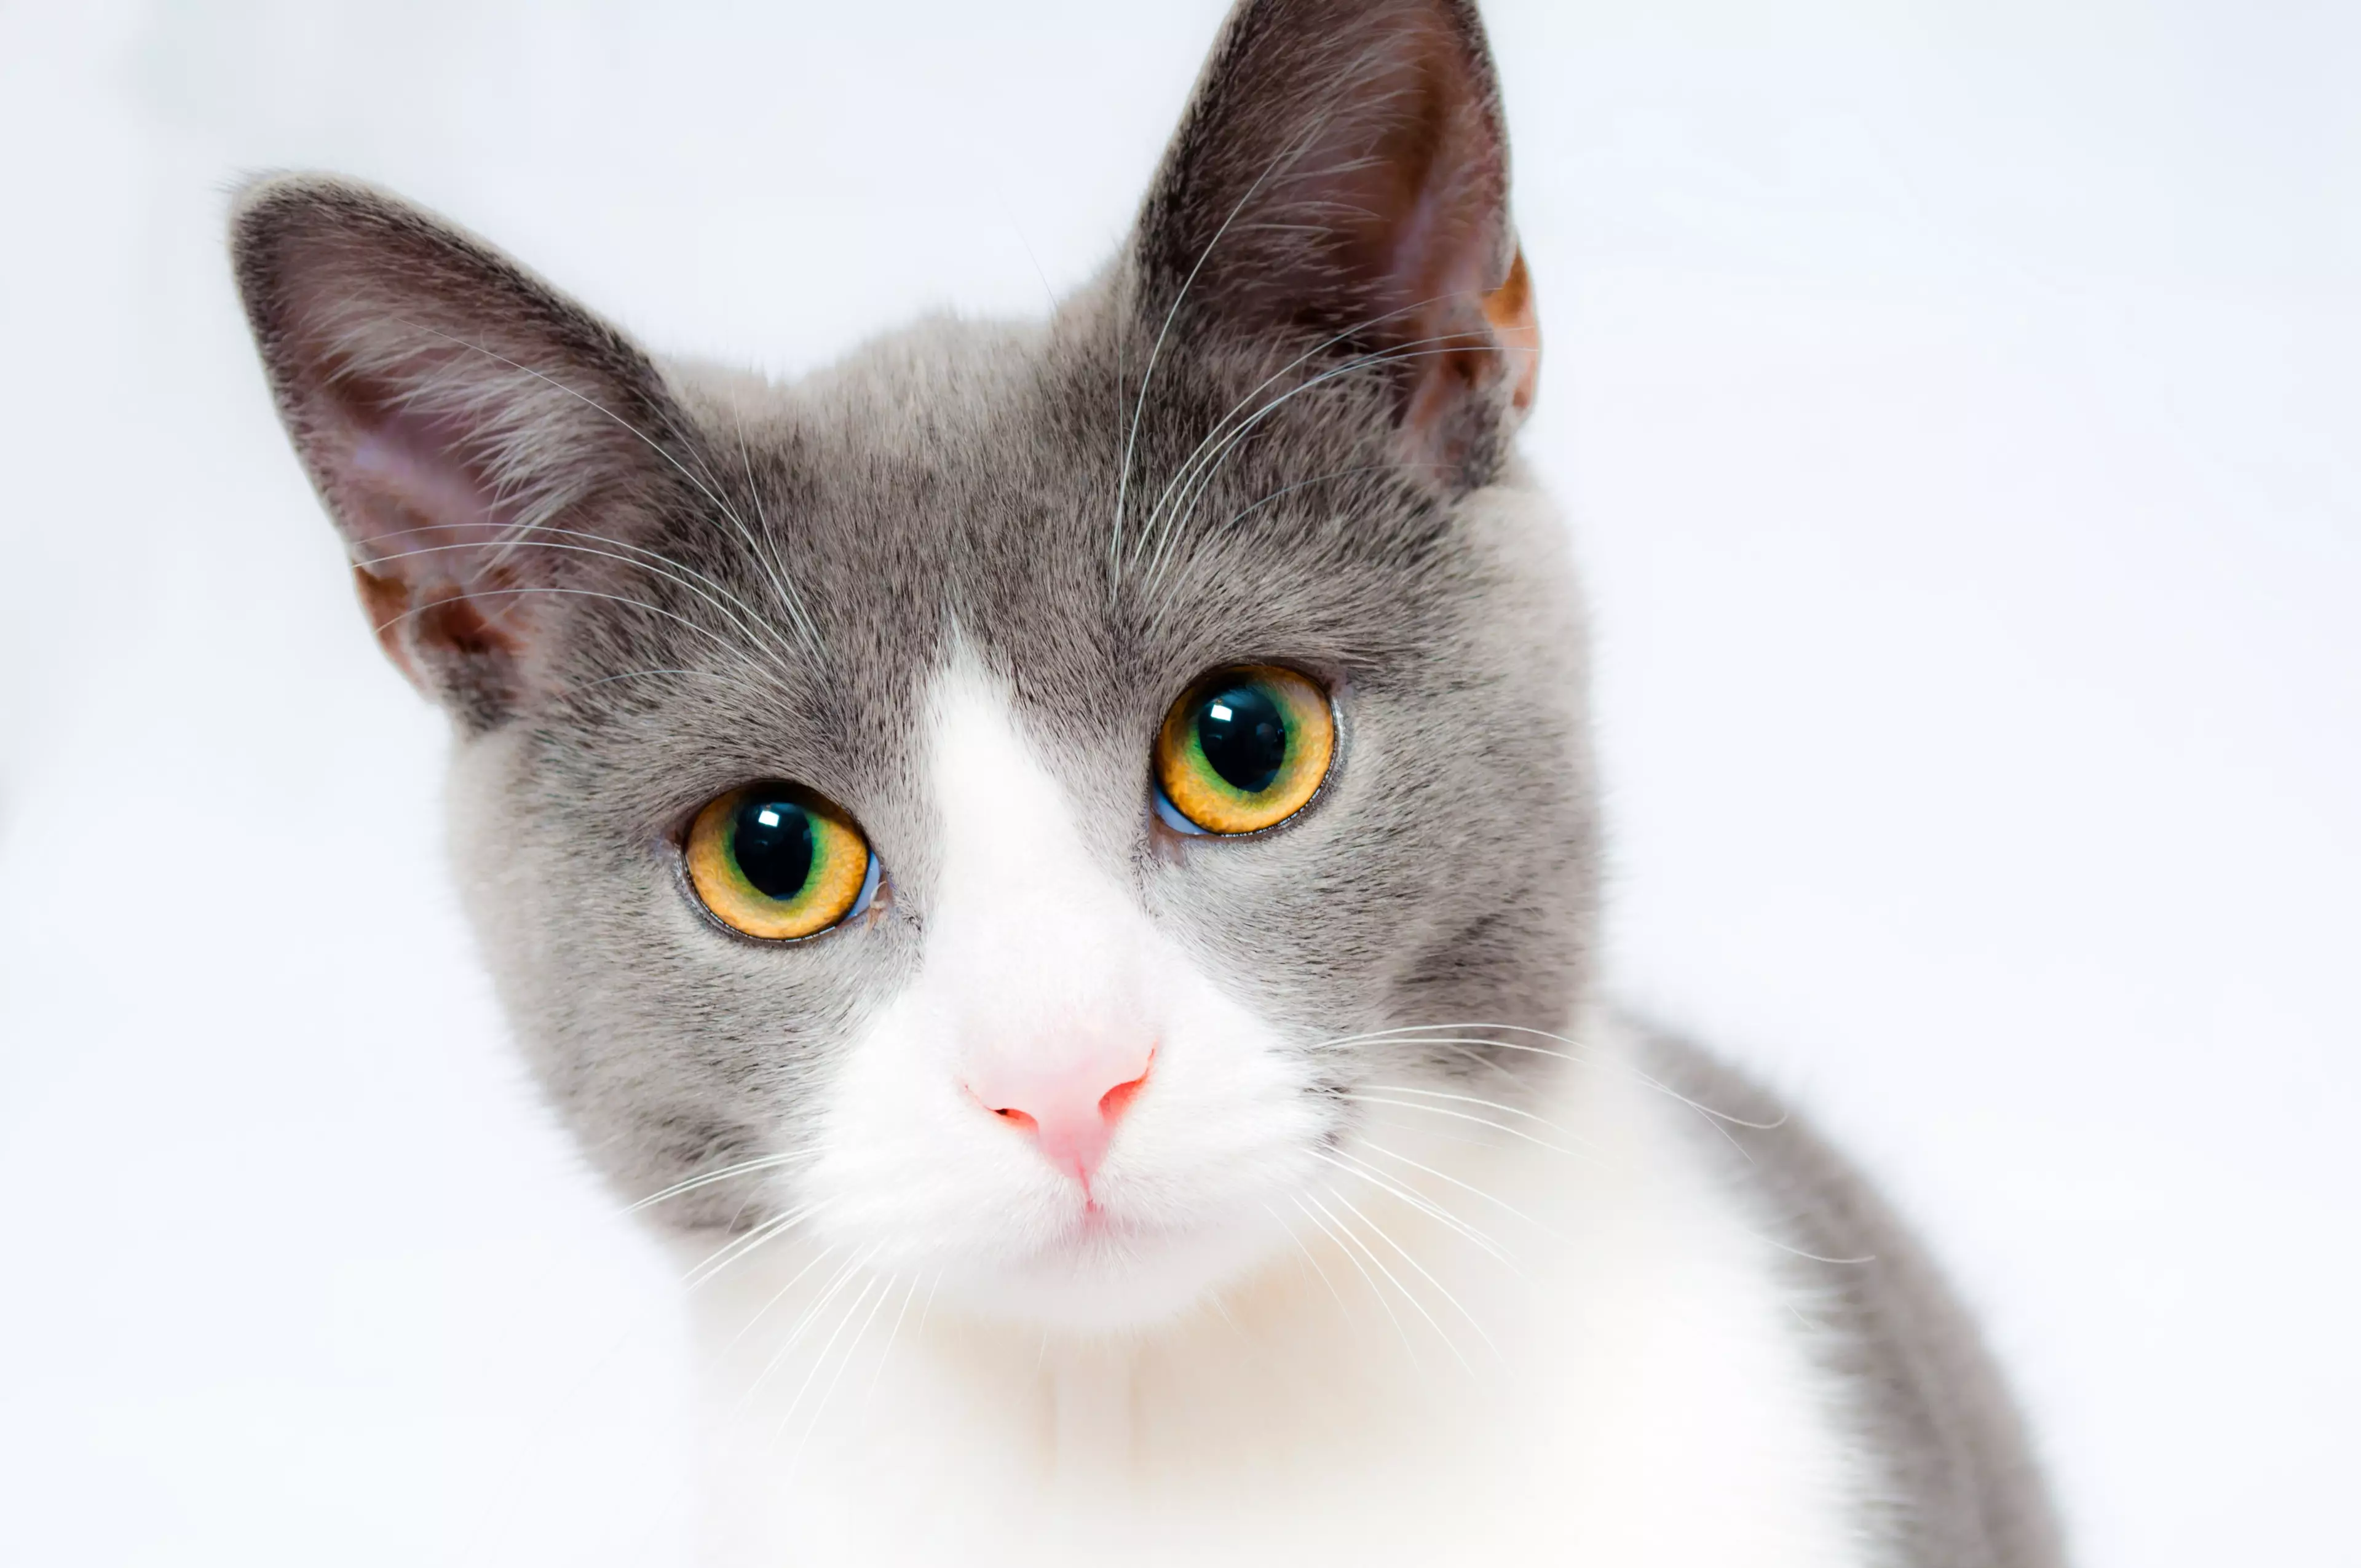 Cats have been named the cutest animal (